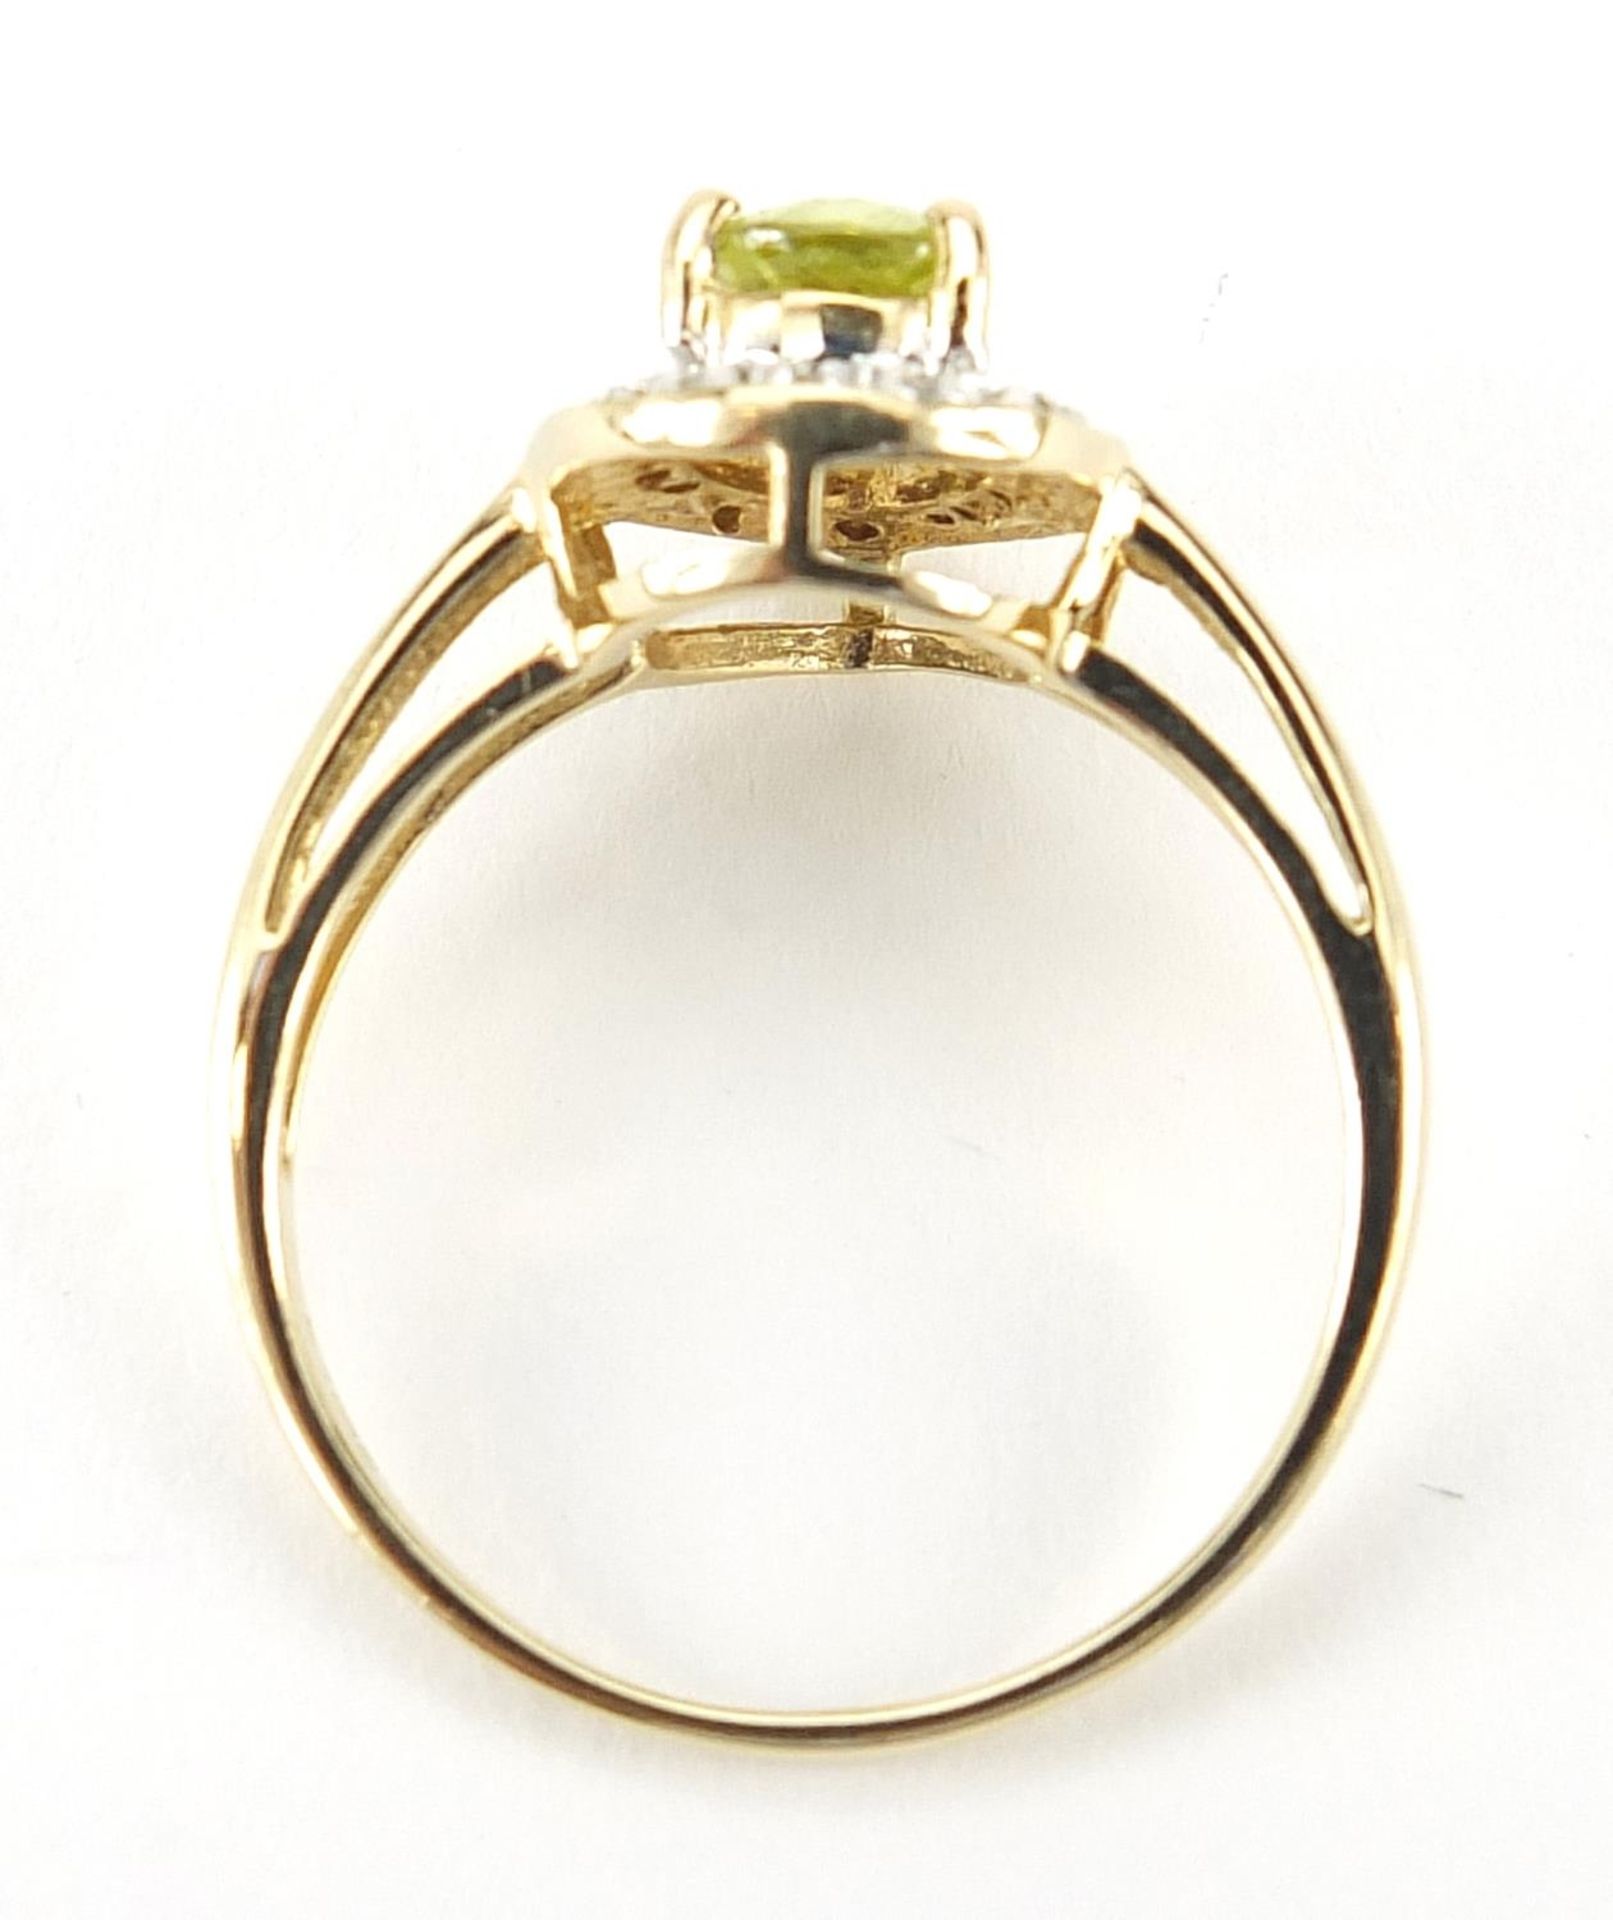 9ct gold peridot and diamond ring, size N, 2.3g - Image 4 of 6